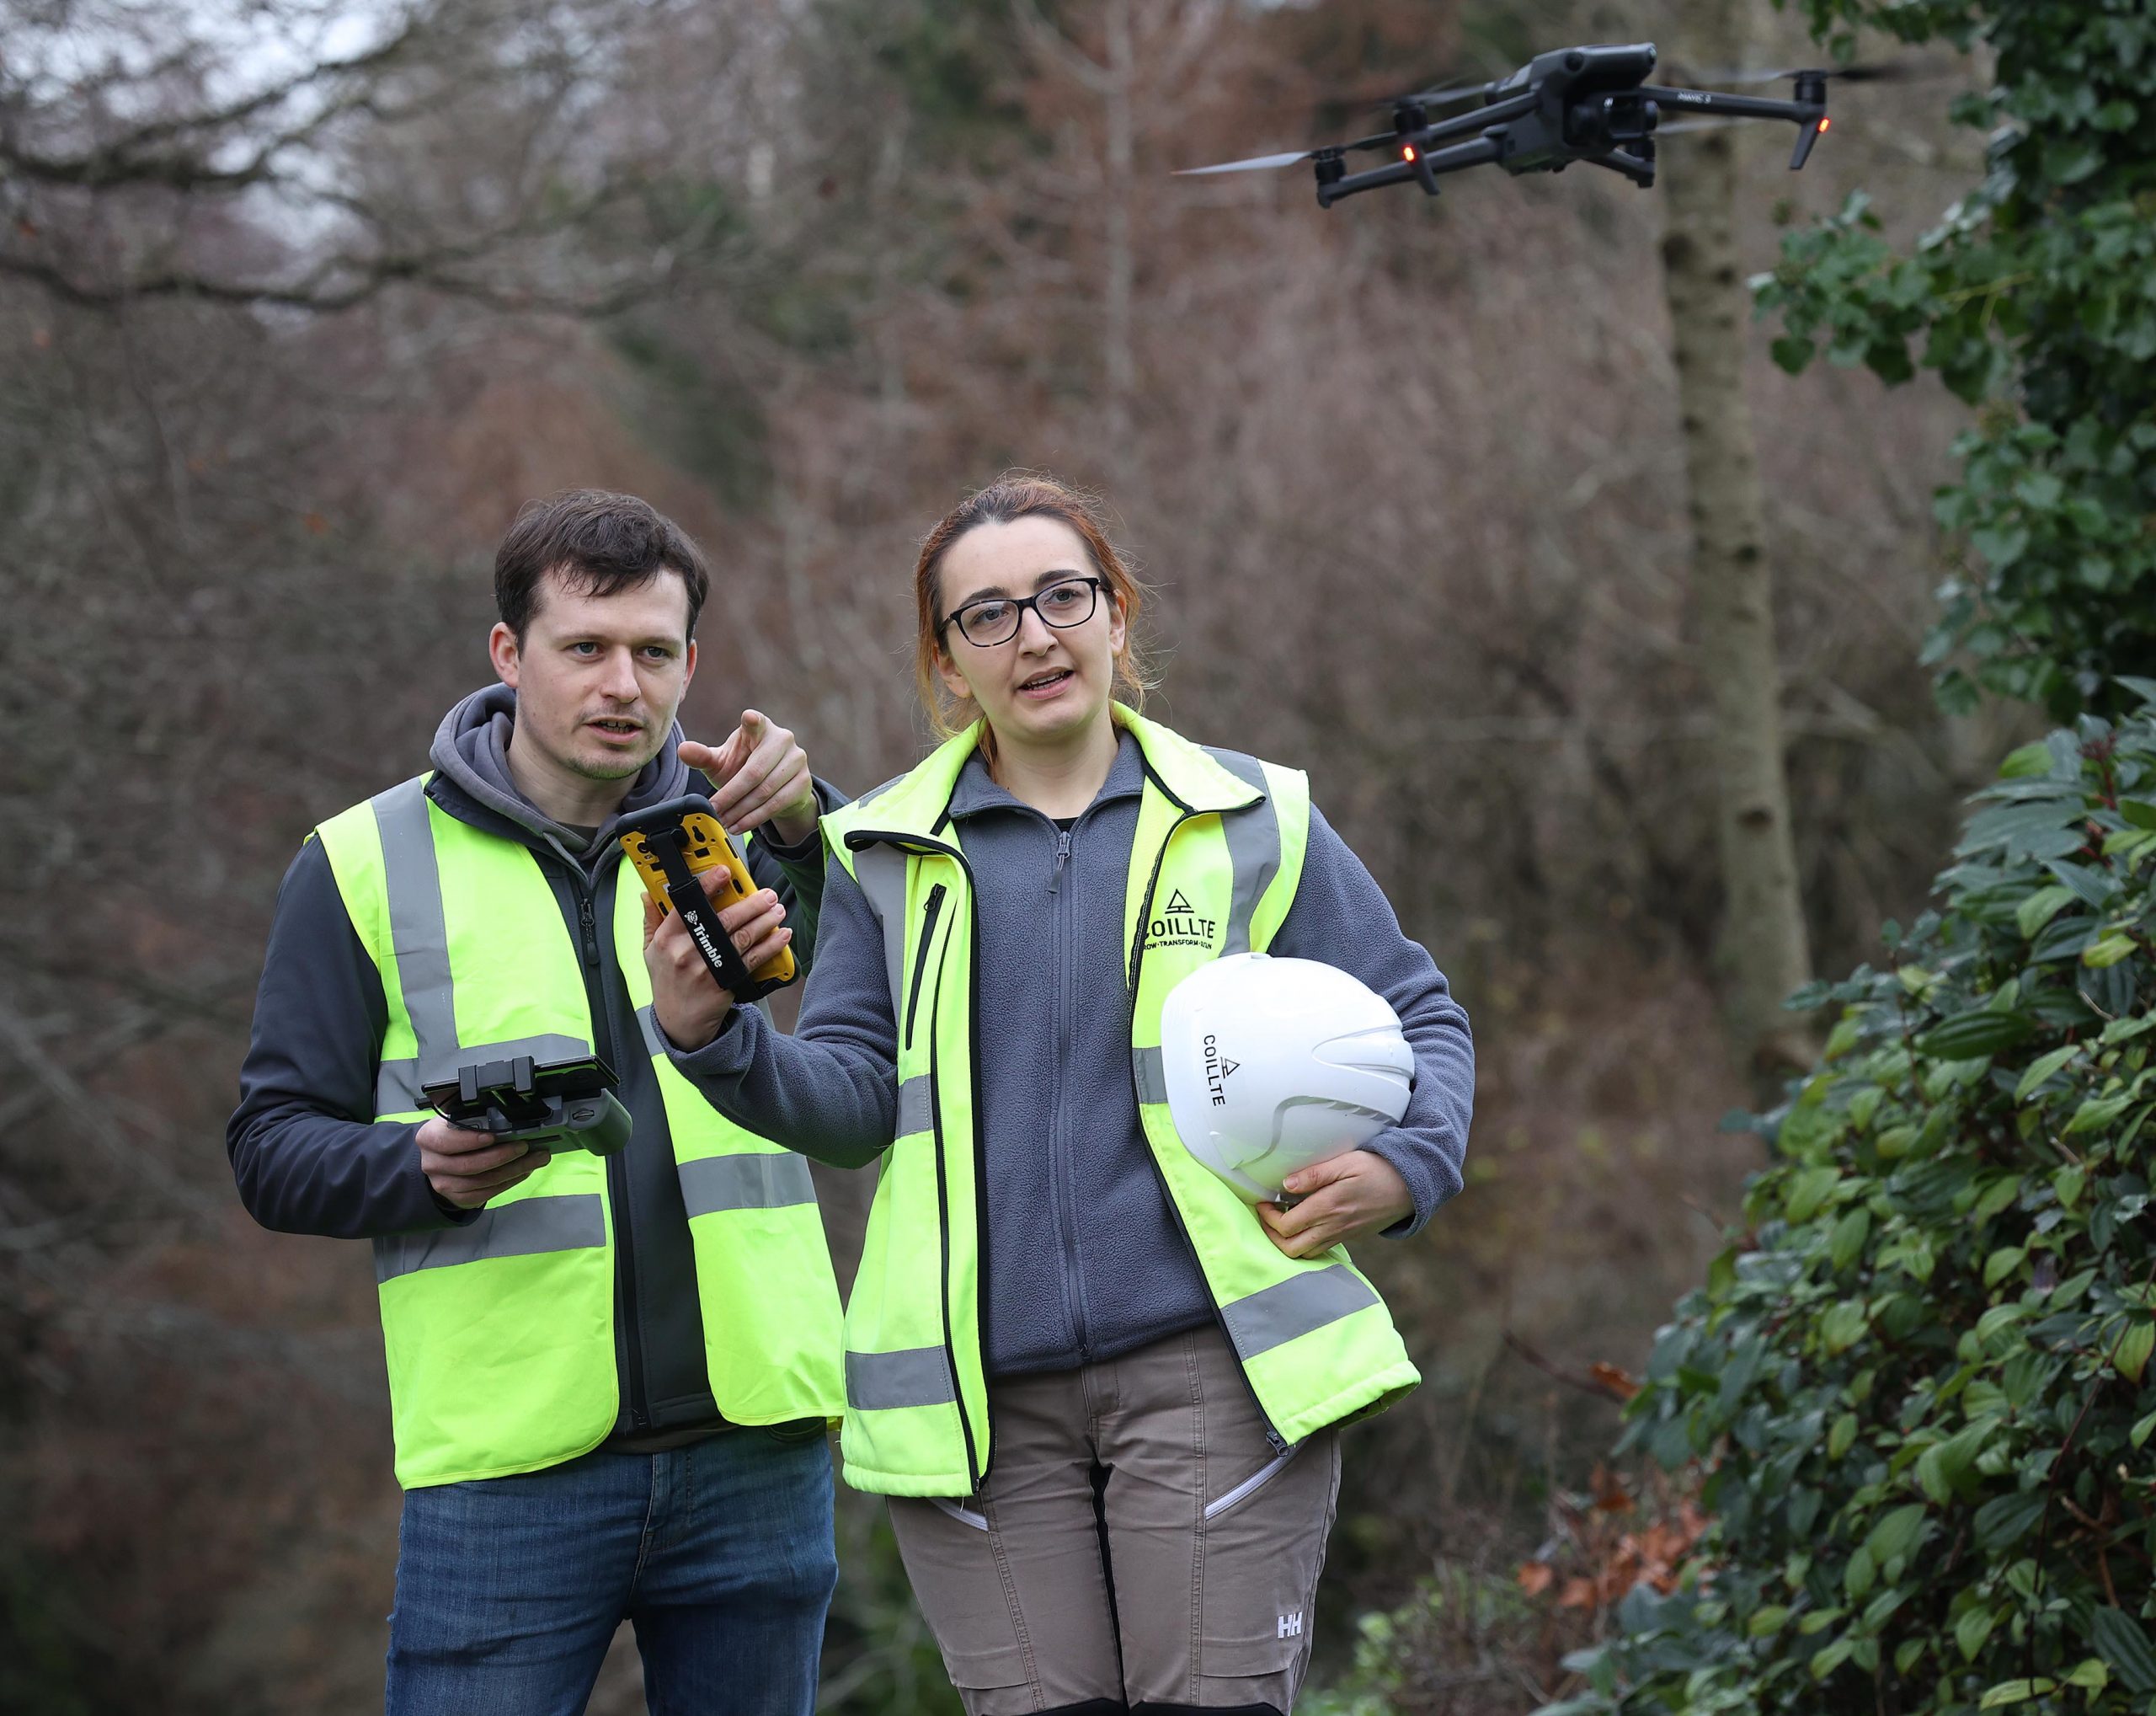 Two foresters standing on a forest road in high visibility jackets operating a drone